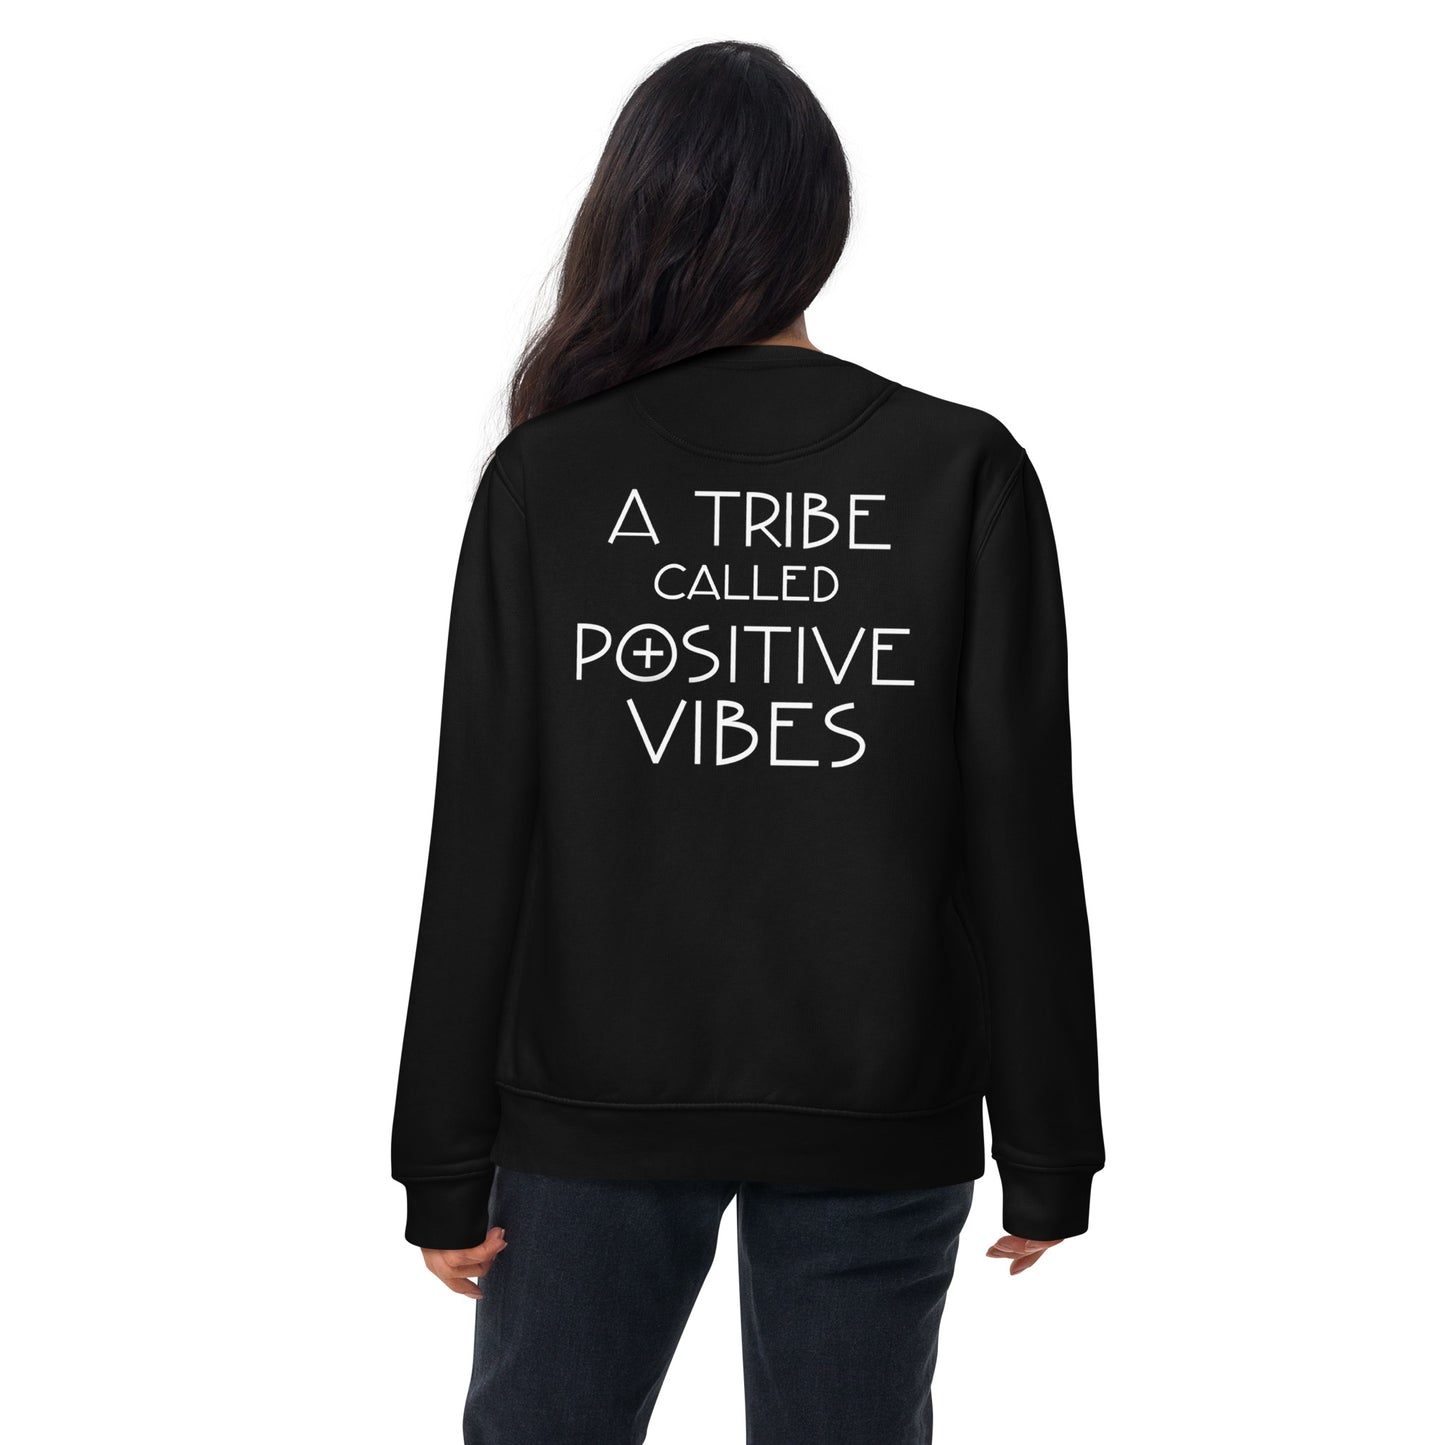 A Tribe Called Positive Vibes Unisex Sweatshirt